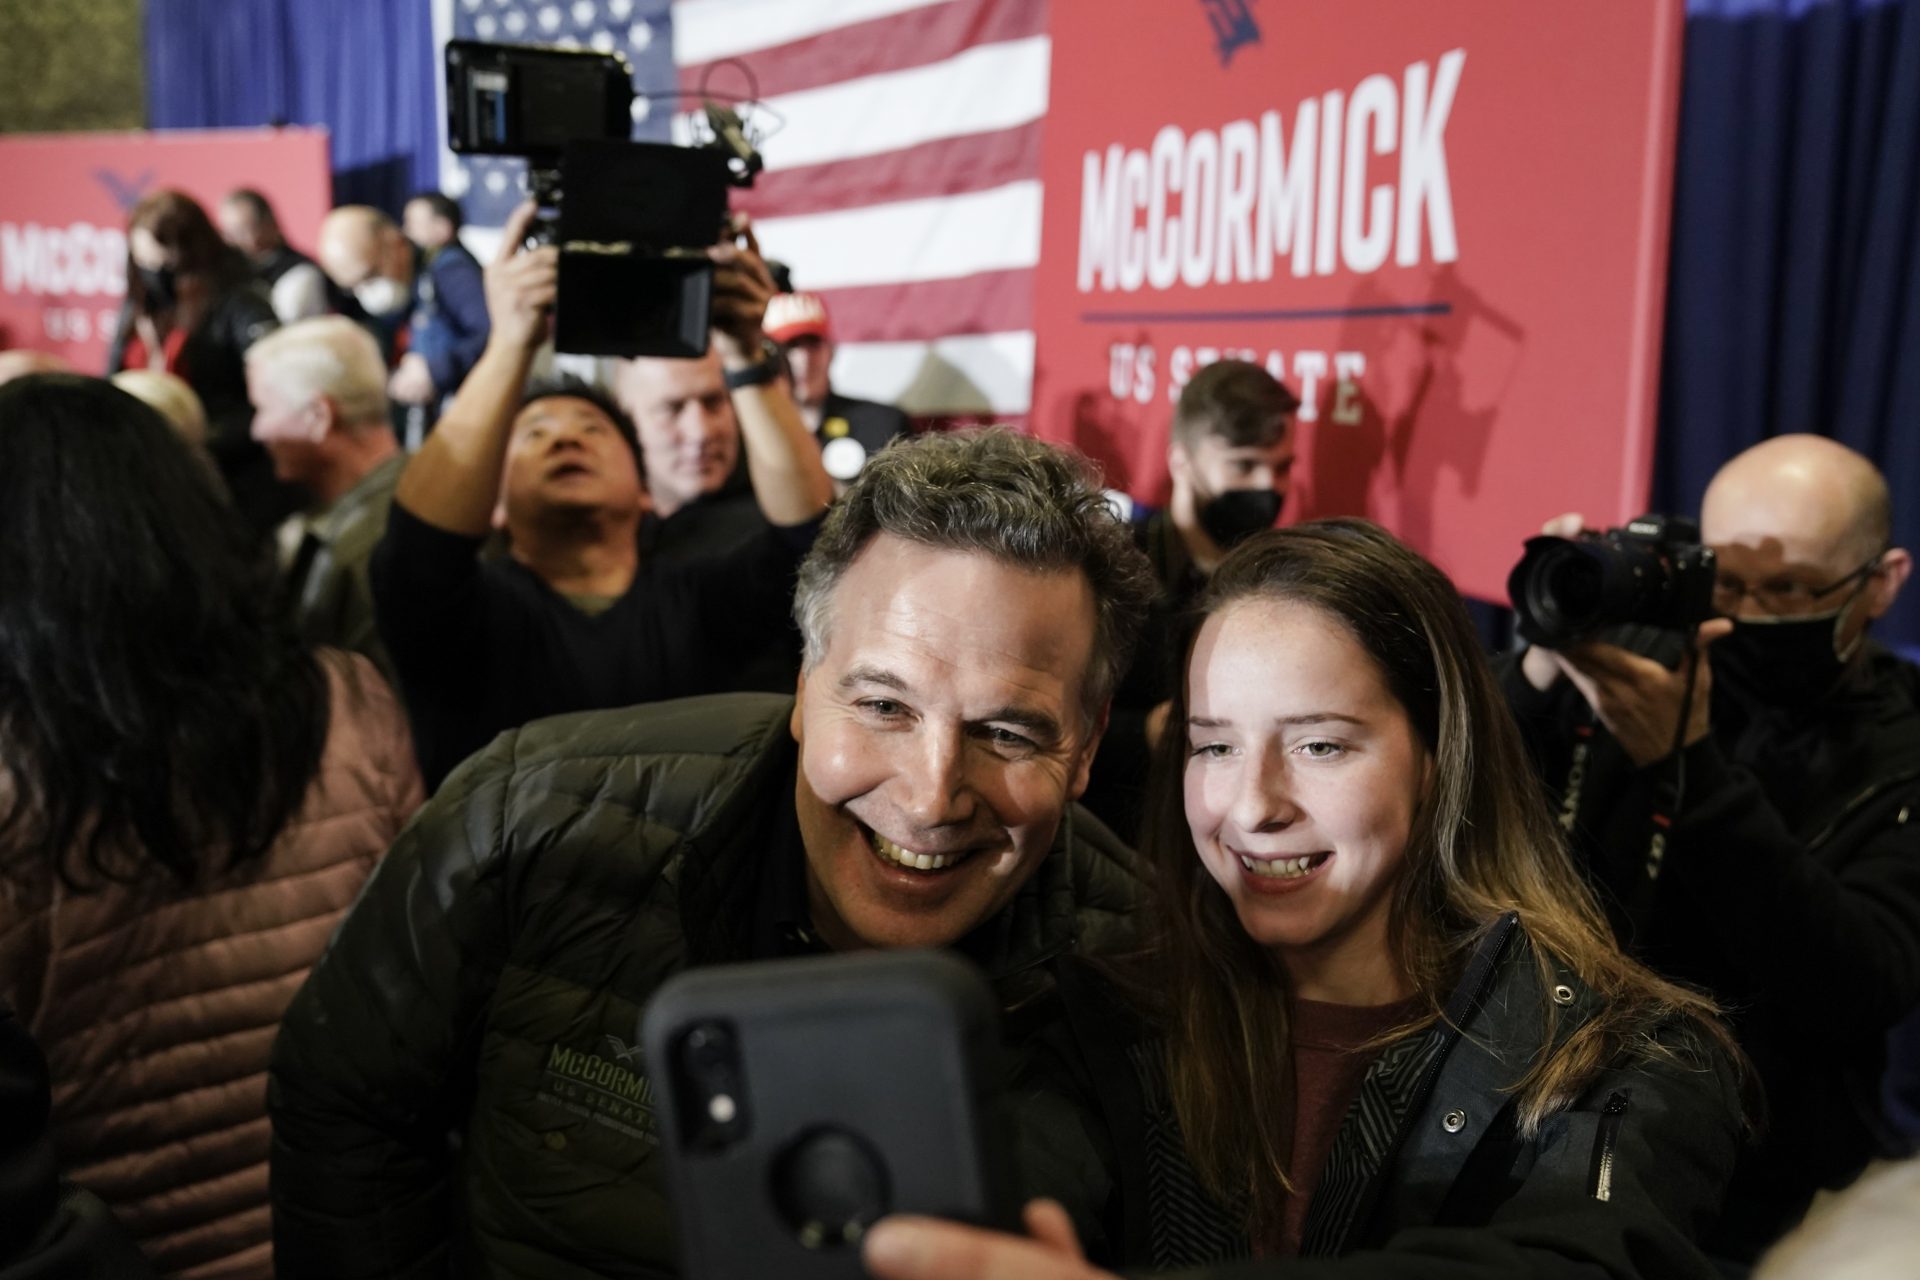 Dave McCormick, a Republican candidate for U.S. Senate in Pennsylvania, meets with attendees during a campaign event in Coplay, Pa., Tuesday, Jan. 25, 2022.